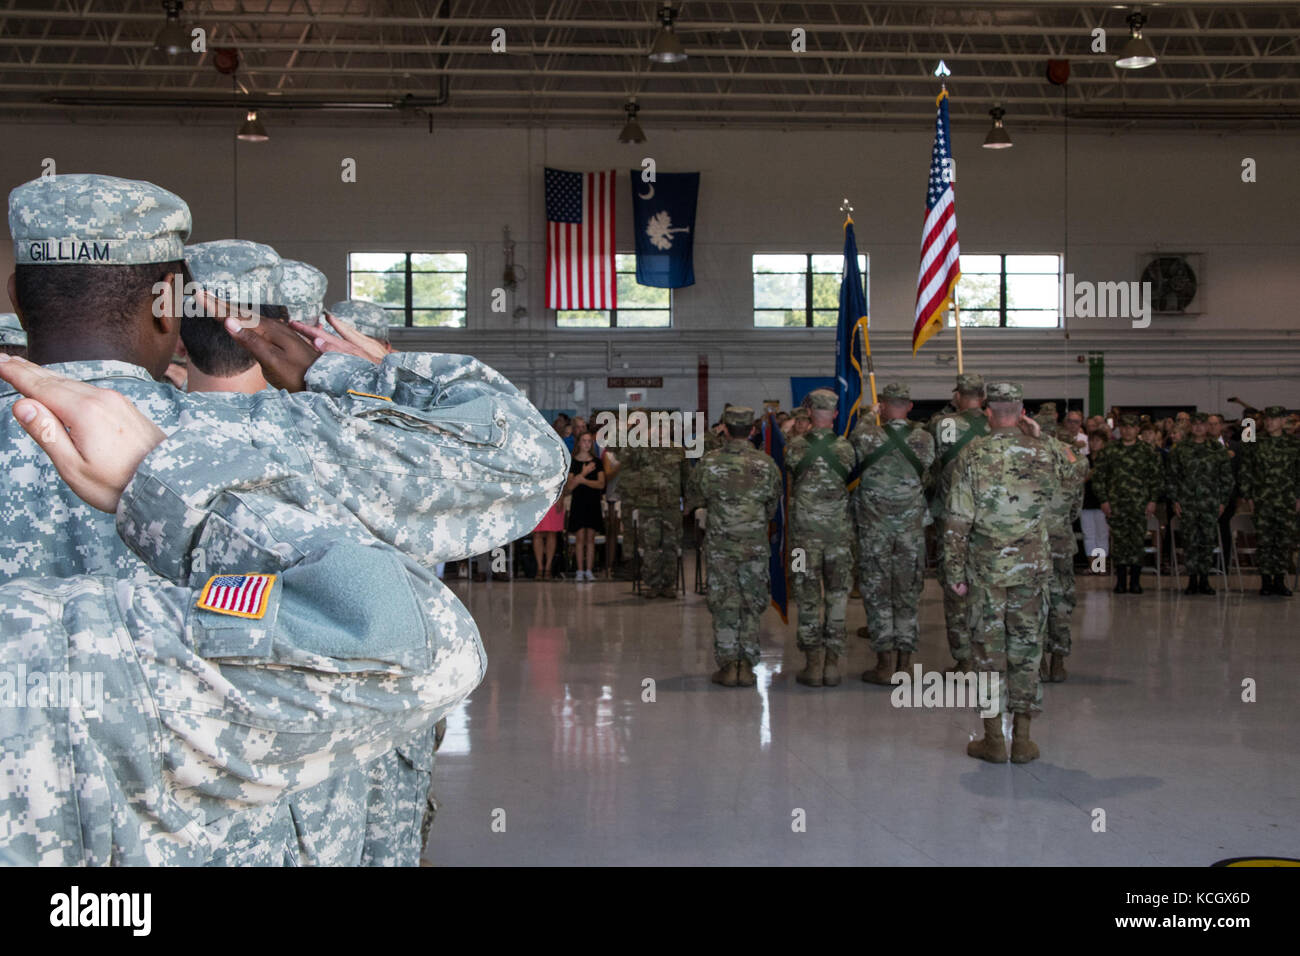 The South Carolina Army National Guard held a departure ceremony Aug. 26, 2017 at McEntire Joint National Guard Base to recognize Soldiers of the 1-151st Attack Reconnaissance Battalion deploying to provide aviation capabilities under the 3rd Combat Aviation Brigade in Afghanistan in support of Operation Freedom's Sentinel. (U.S. Army National Guard Photo by Staff Sgt. Erica Knight, 108th Public Affairs Detachment) Stock Photo